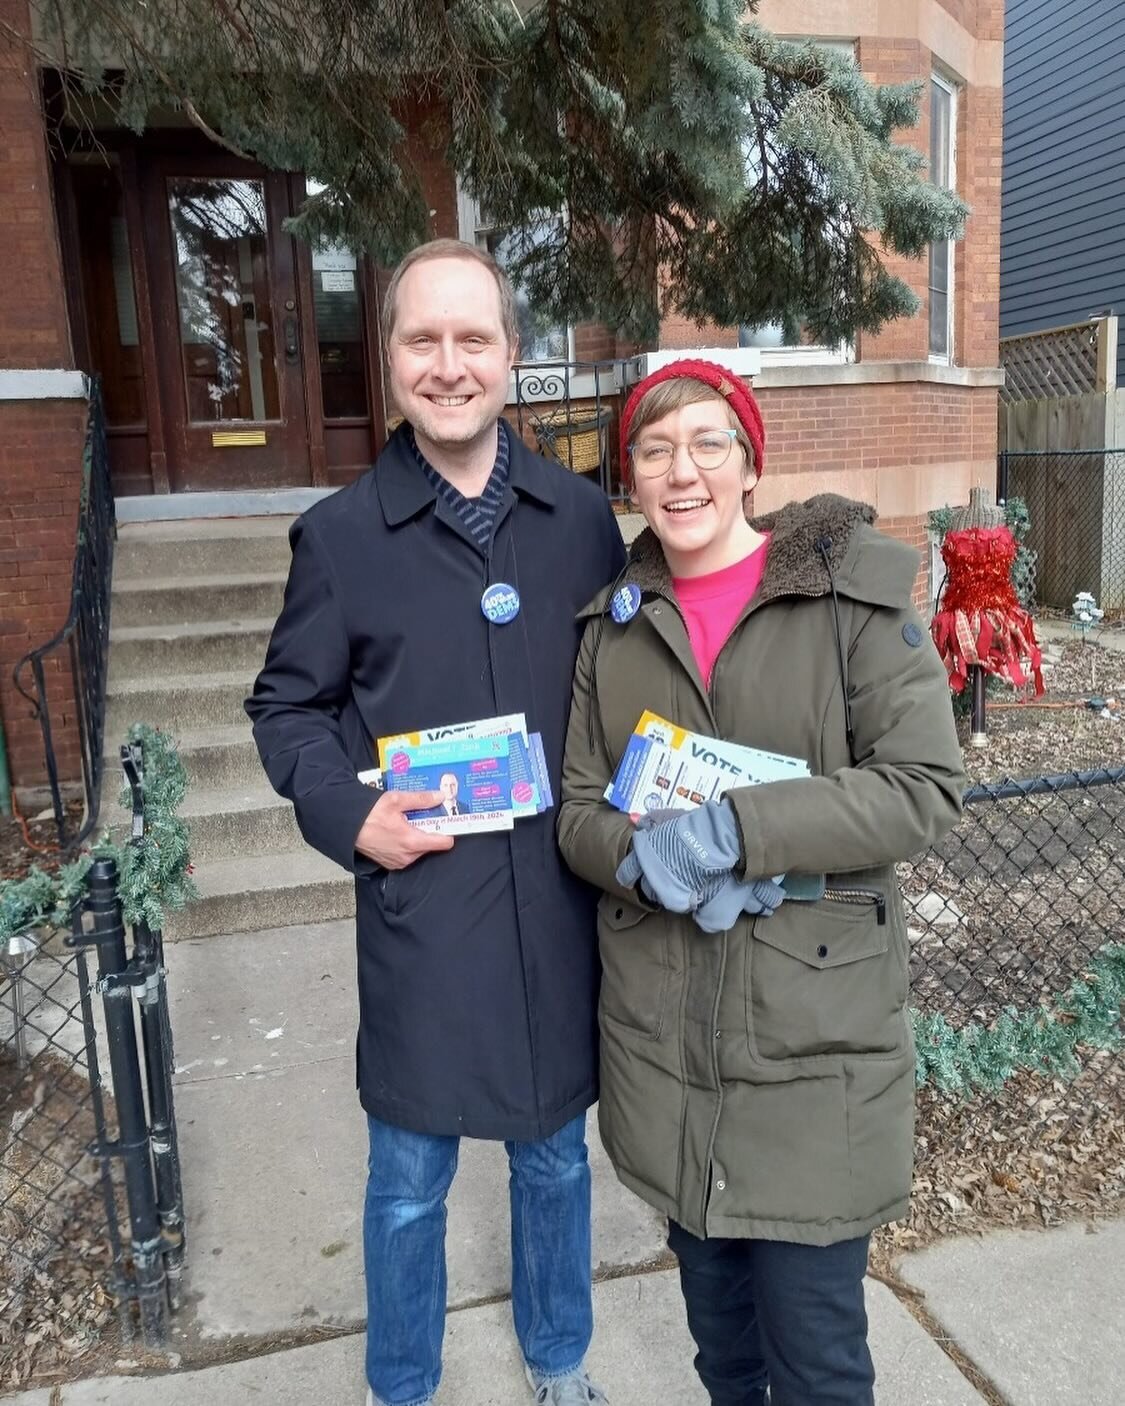 Huge thank you to the 40th Ward Democratic Committeeperson, Maggie O&rsquo;Keefe, and the 40th Ward Dems for inviting me to knock doors with them last weekend. The 40th Ward may be a small portion of my subcircuit, but as Judge I would be called on t